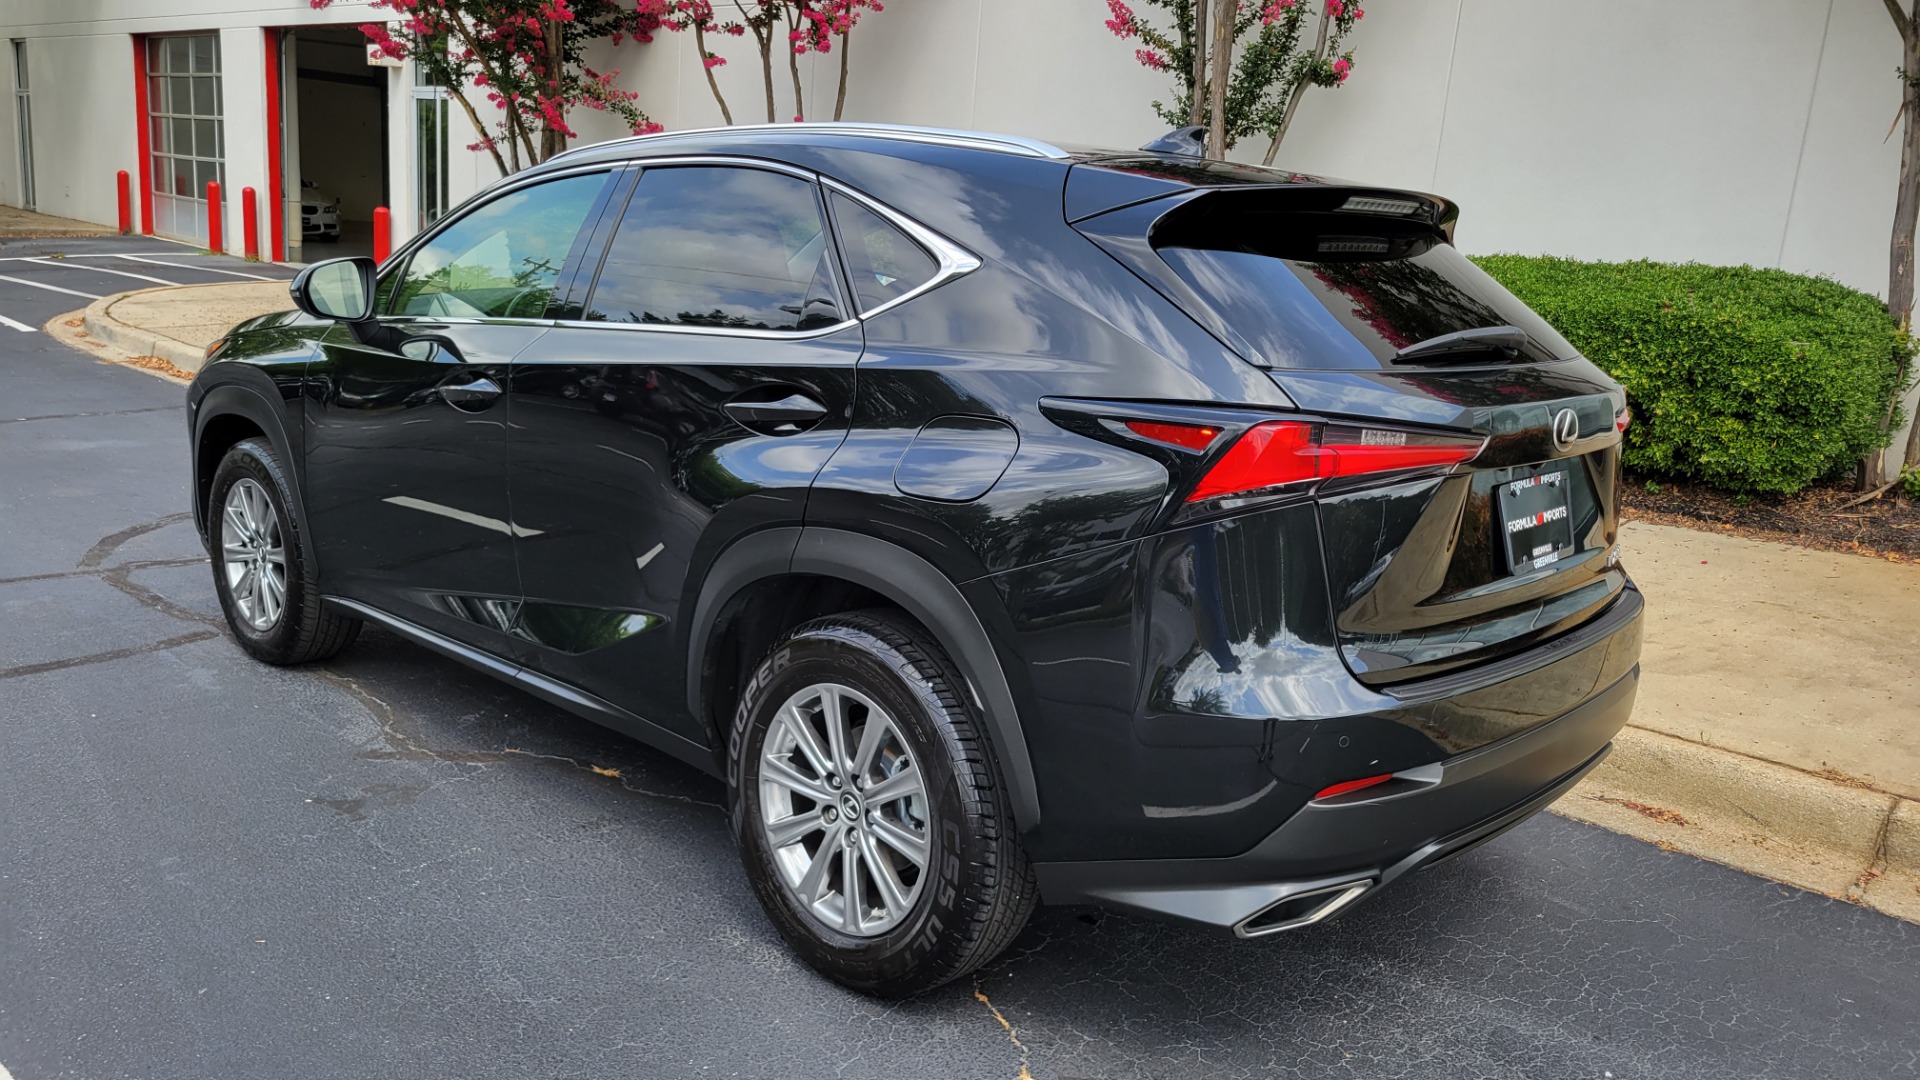 Used 2019 Lexus NX 300 / 2.0L TURBO / AUTO / SUNROOF / VENTILATED SEATS / CAMERA for sale Sold at Formula Imports in Charlotte NC 28227 4